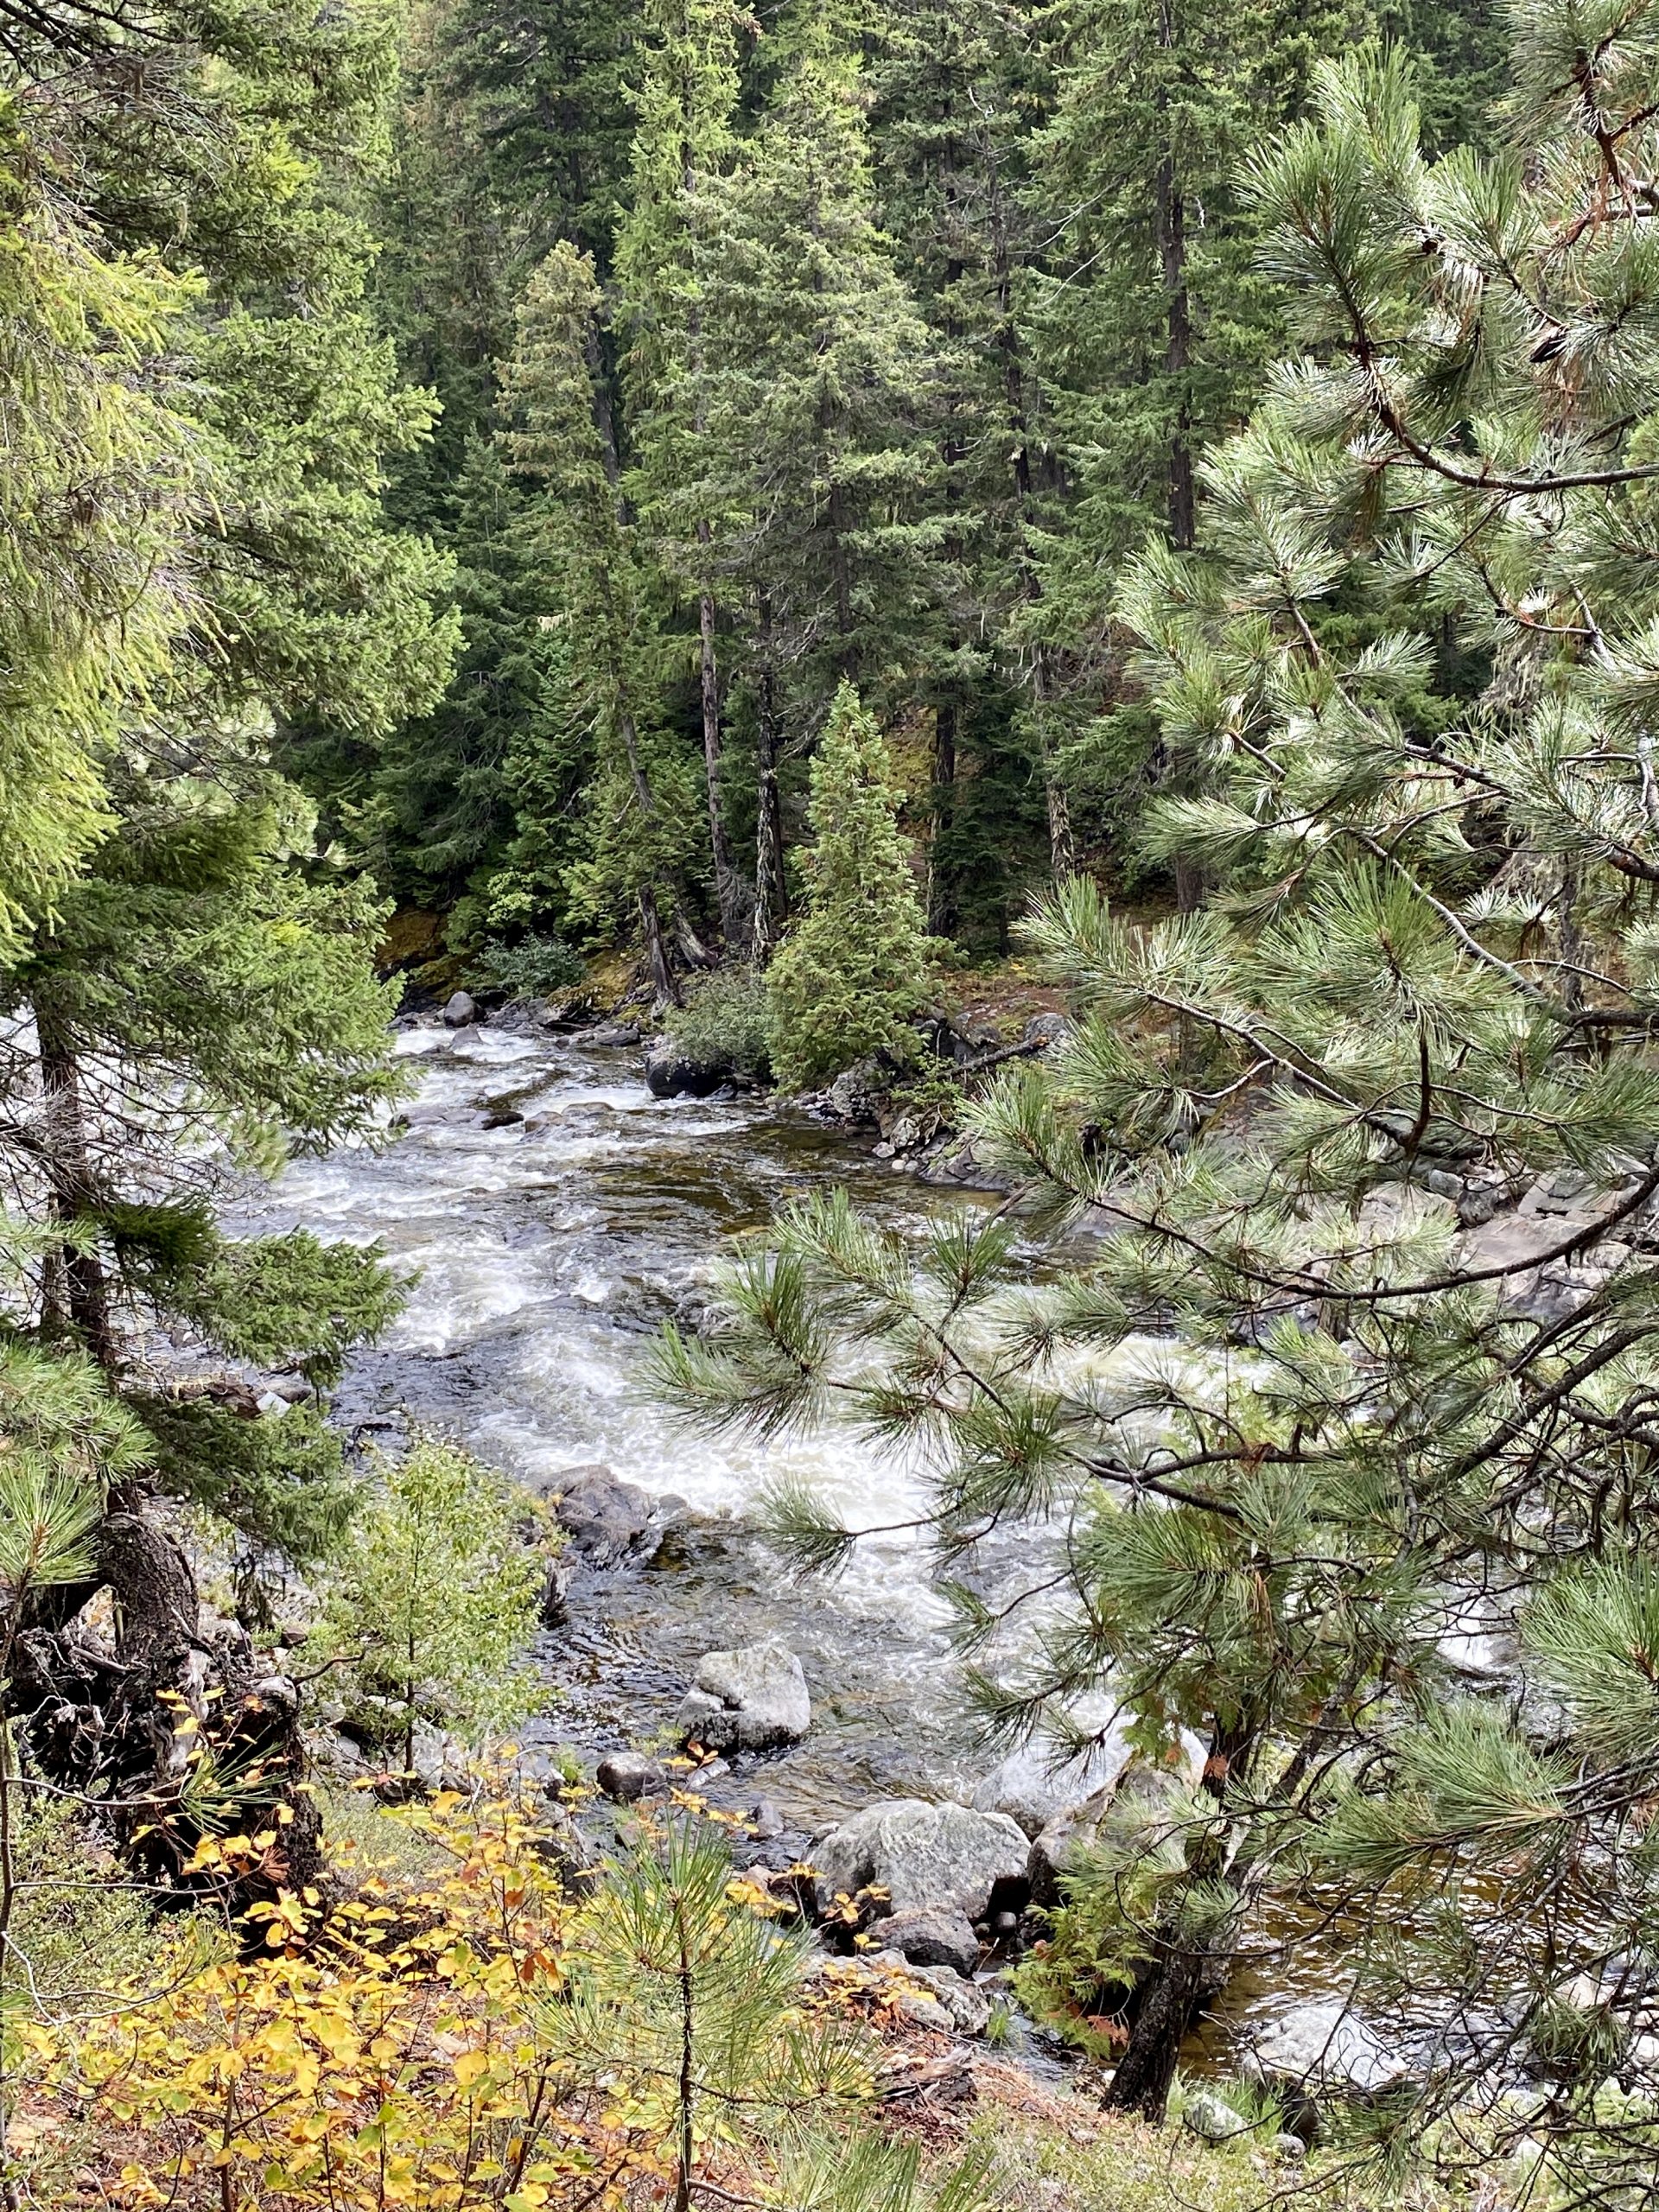 How to Spend Seven Fall Days in the Pacific Northwest including Leavenworth, WA